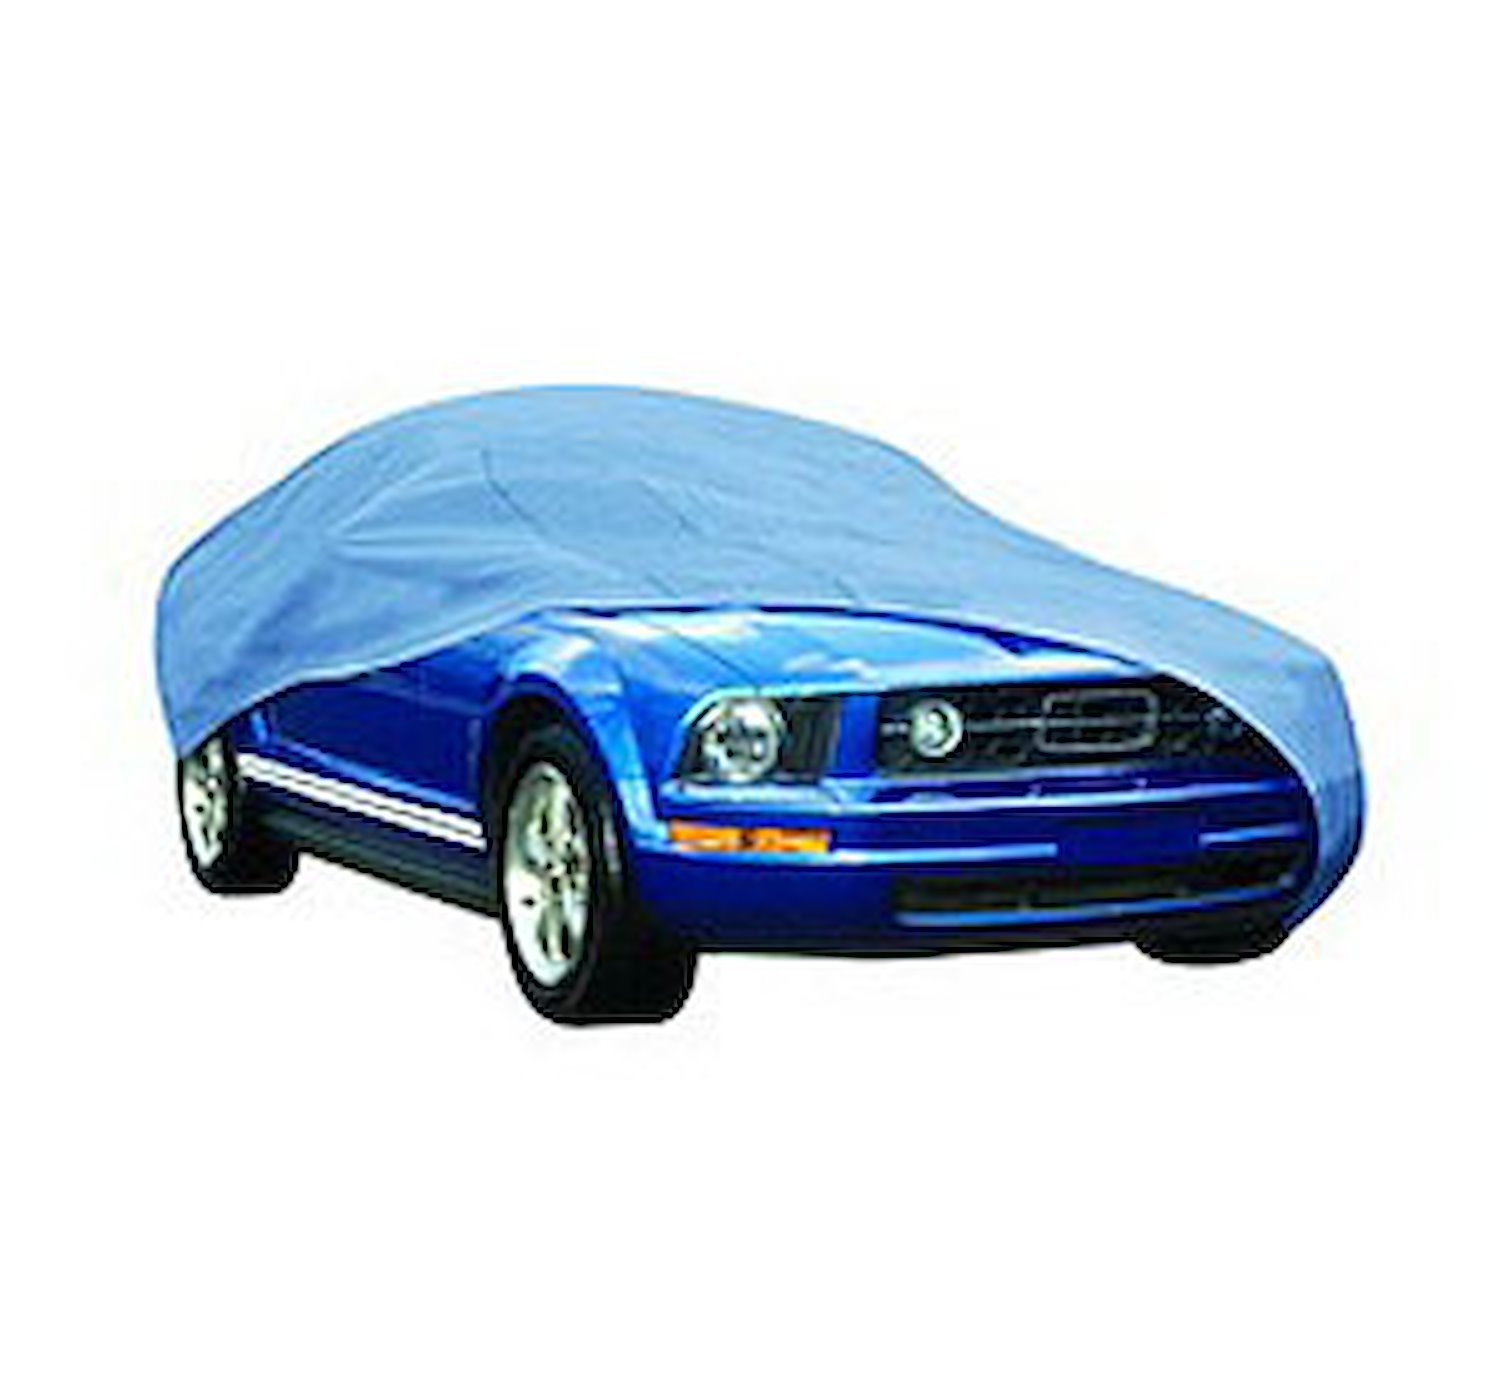 Duro Car Cover Fits Cars Up To 14